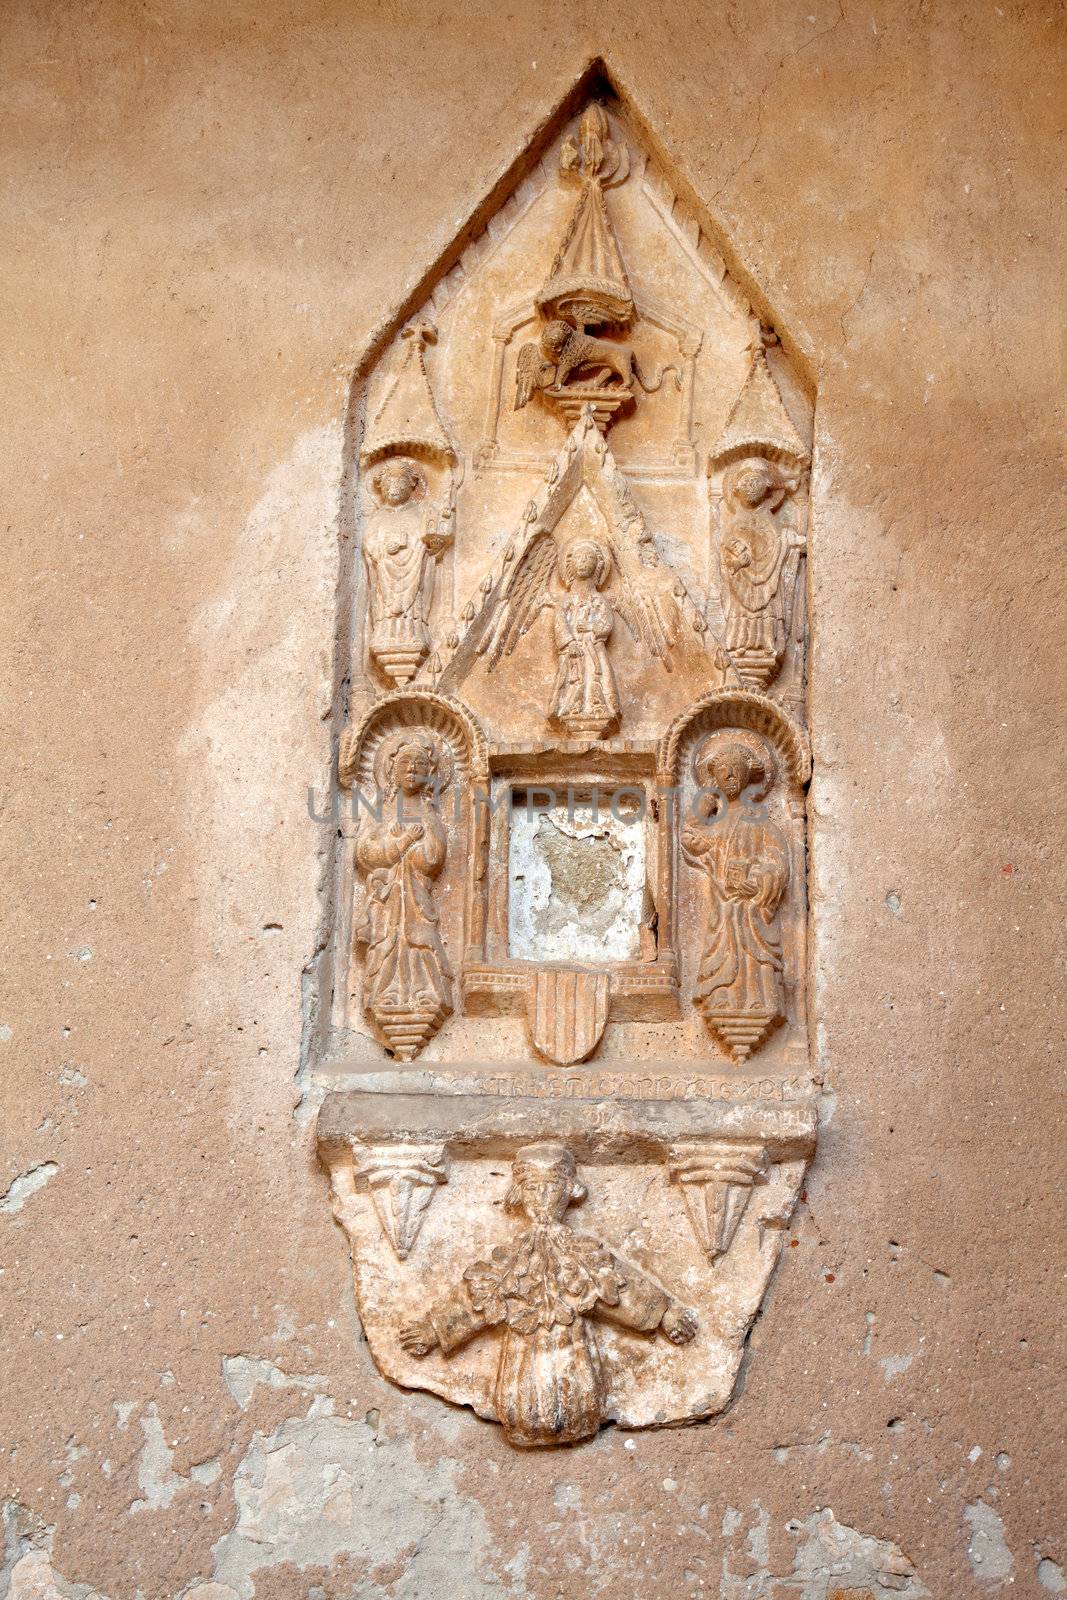 religious stone carving, on the wall